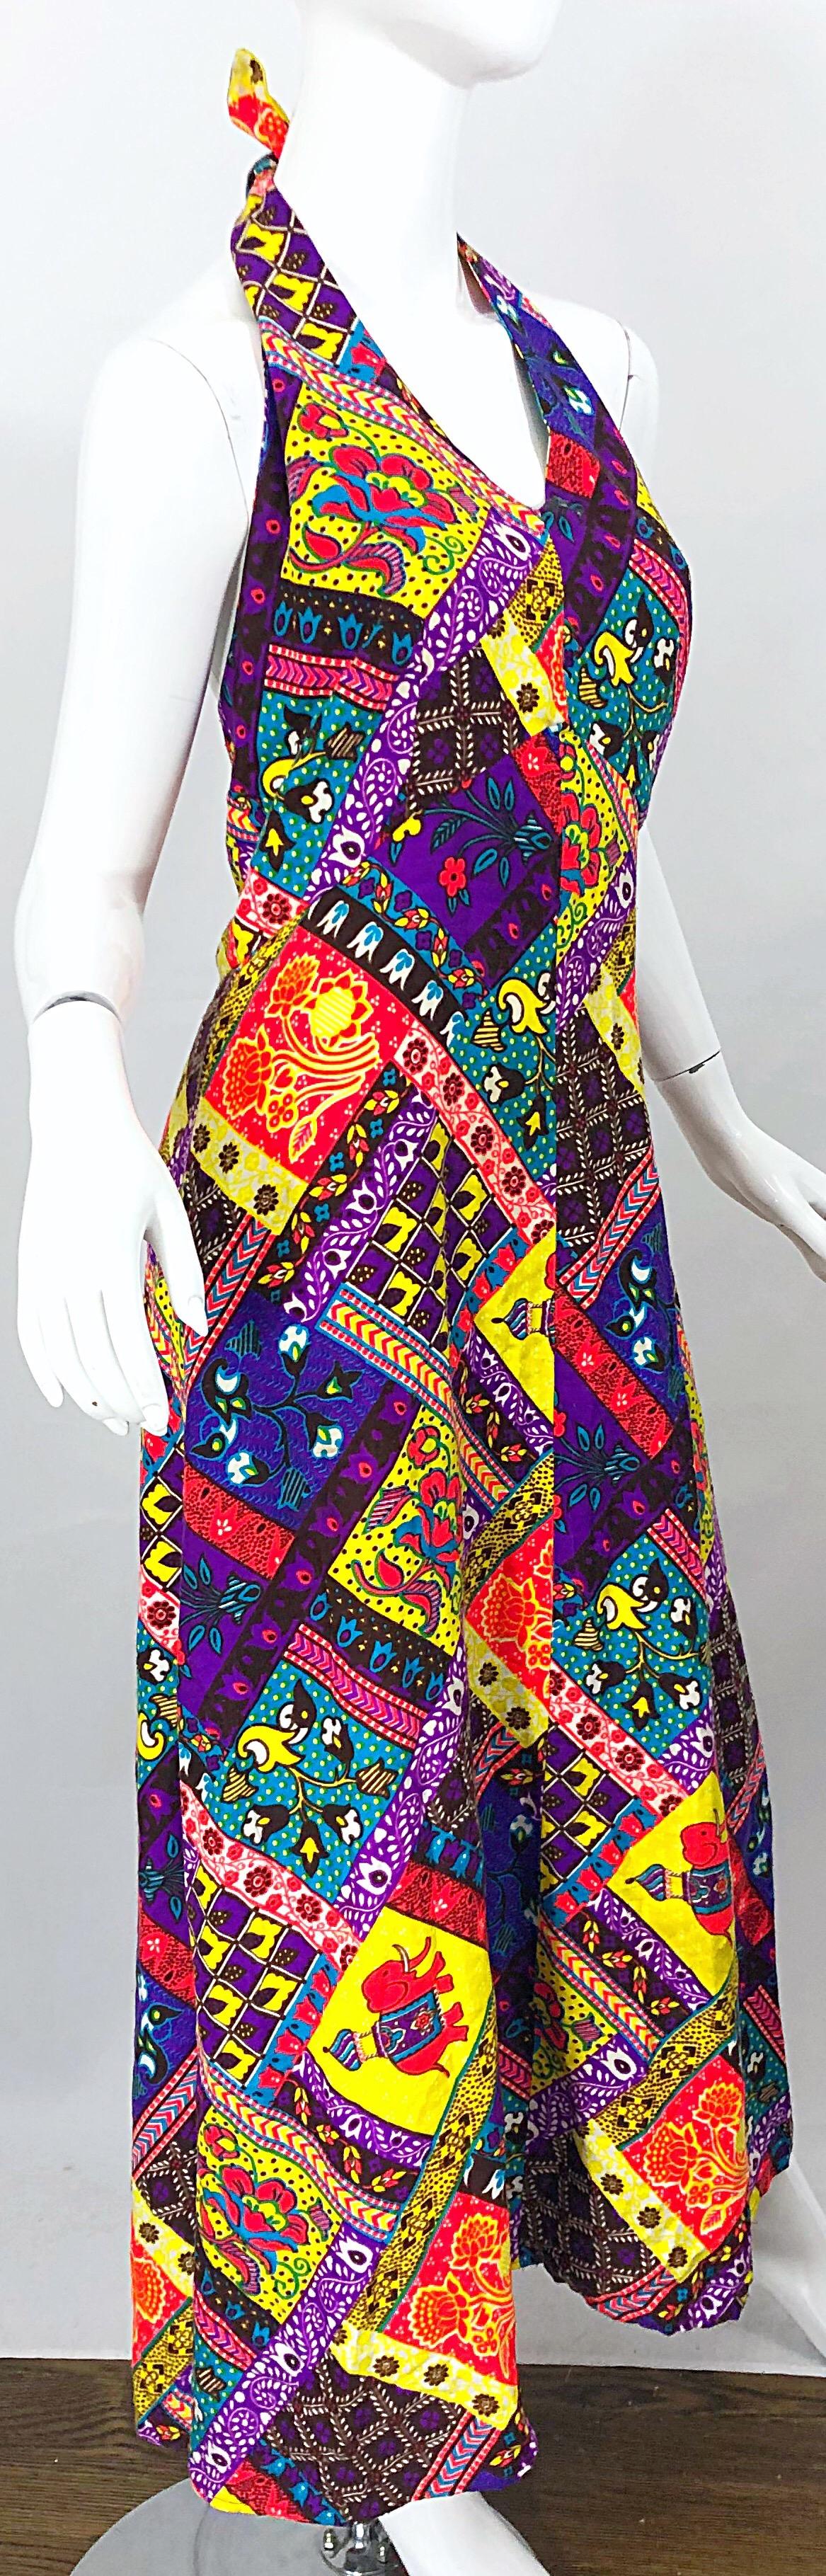 1970s Patchwork Size Medium / Large Novelty Print Vintage 70s Cotton Maxi Dress In Excellent Condition For Sale In San Diego, CA